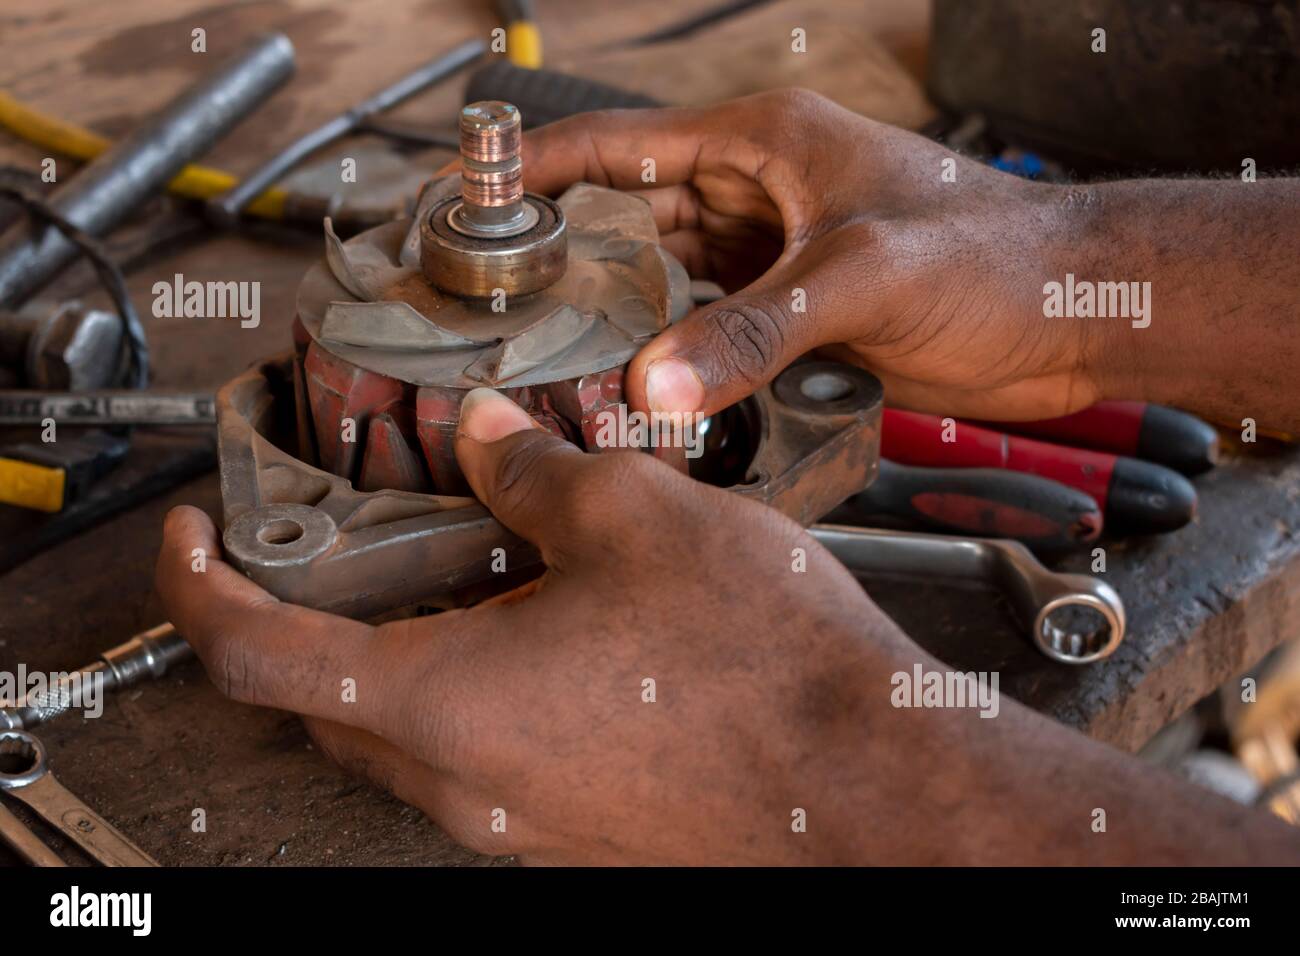 hand working on a coil and tools on a mechanical table Stock Photo